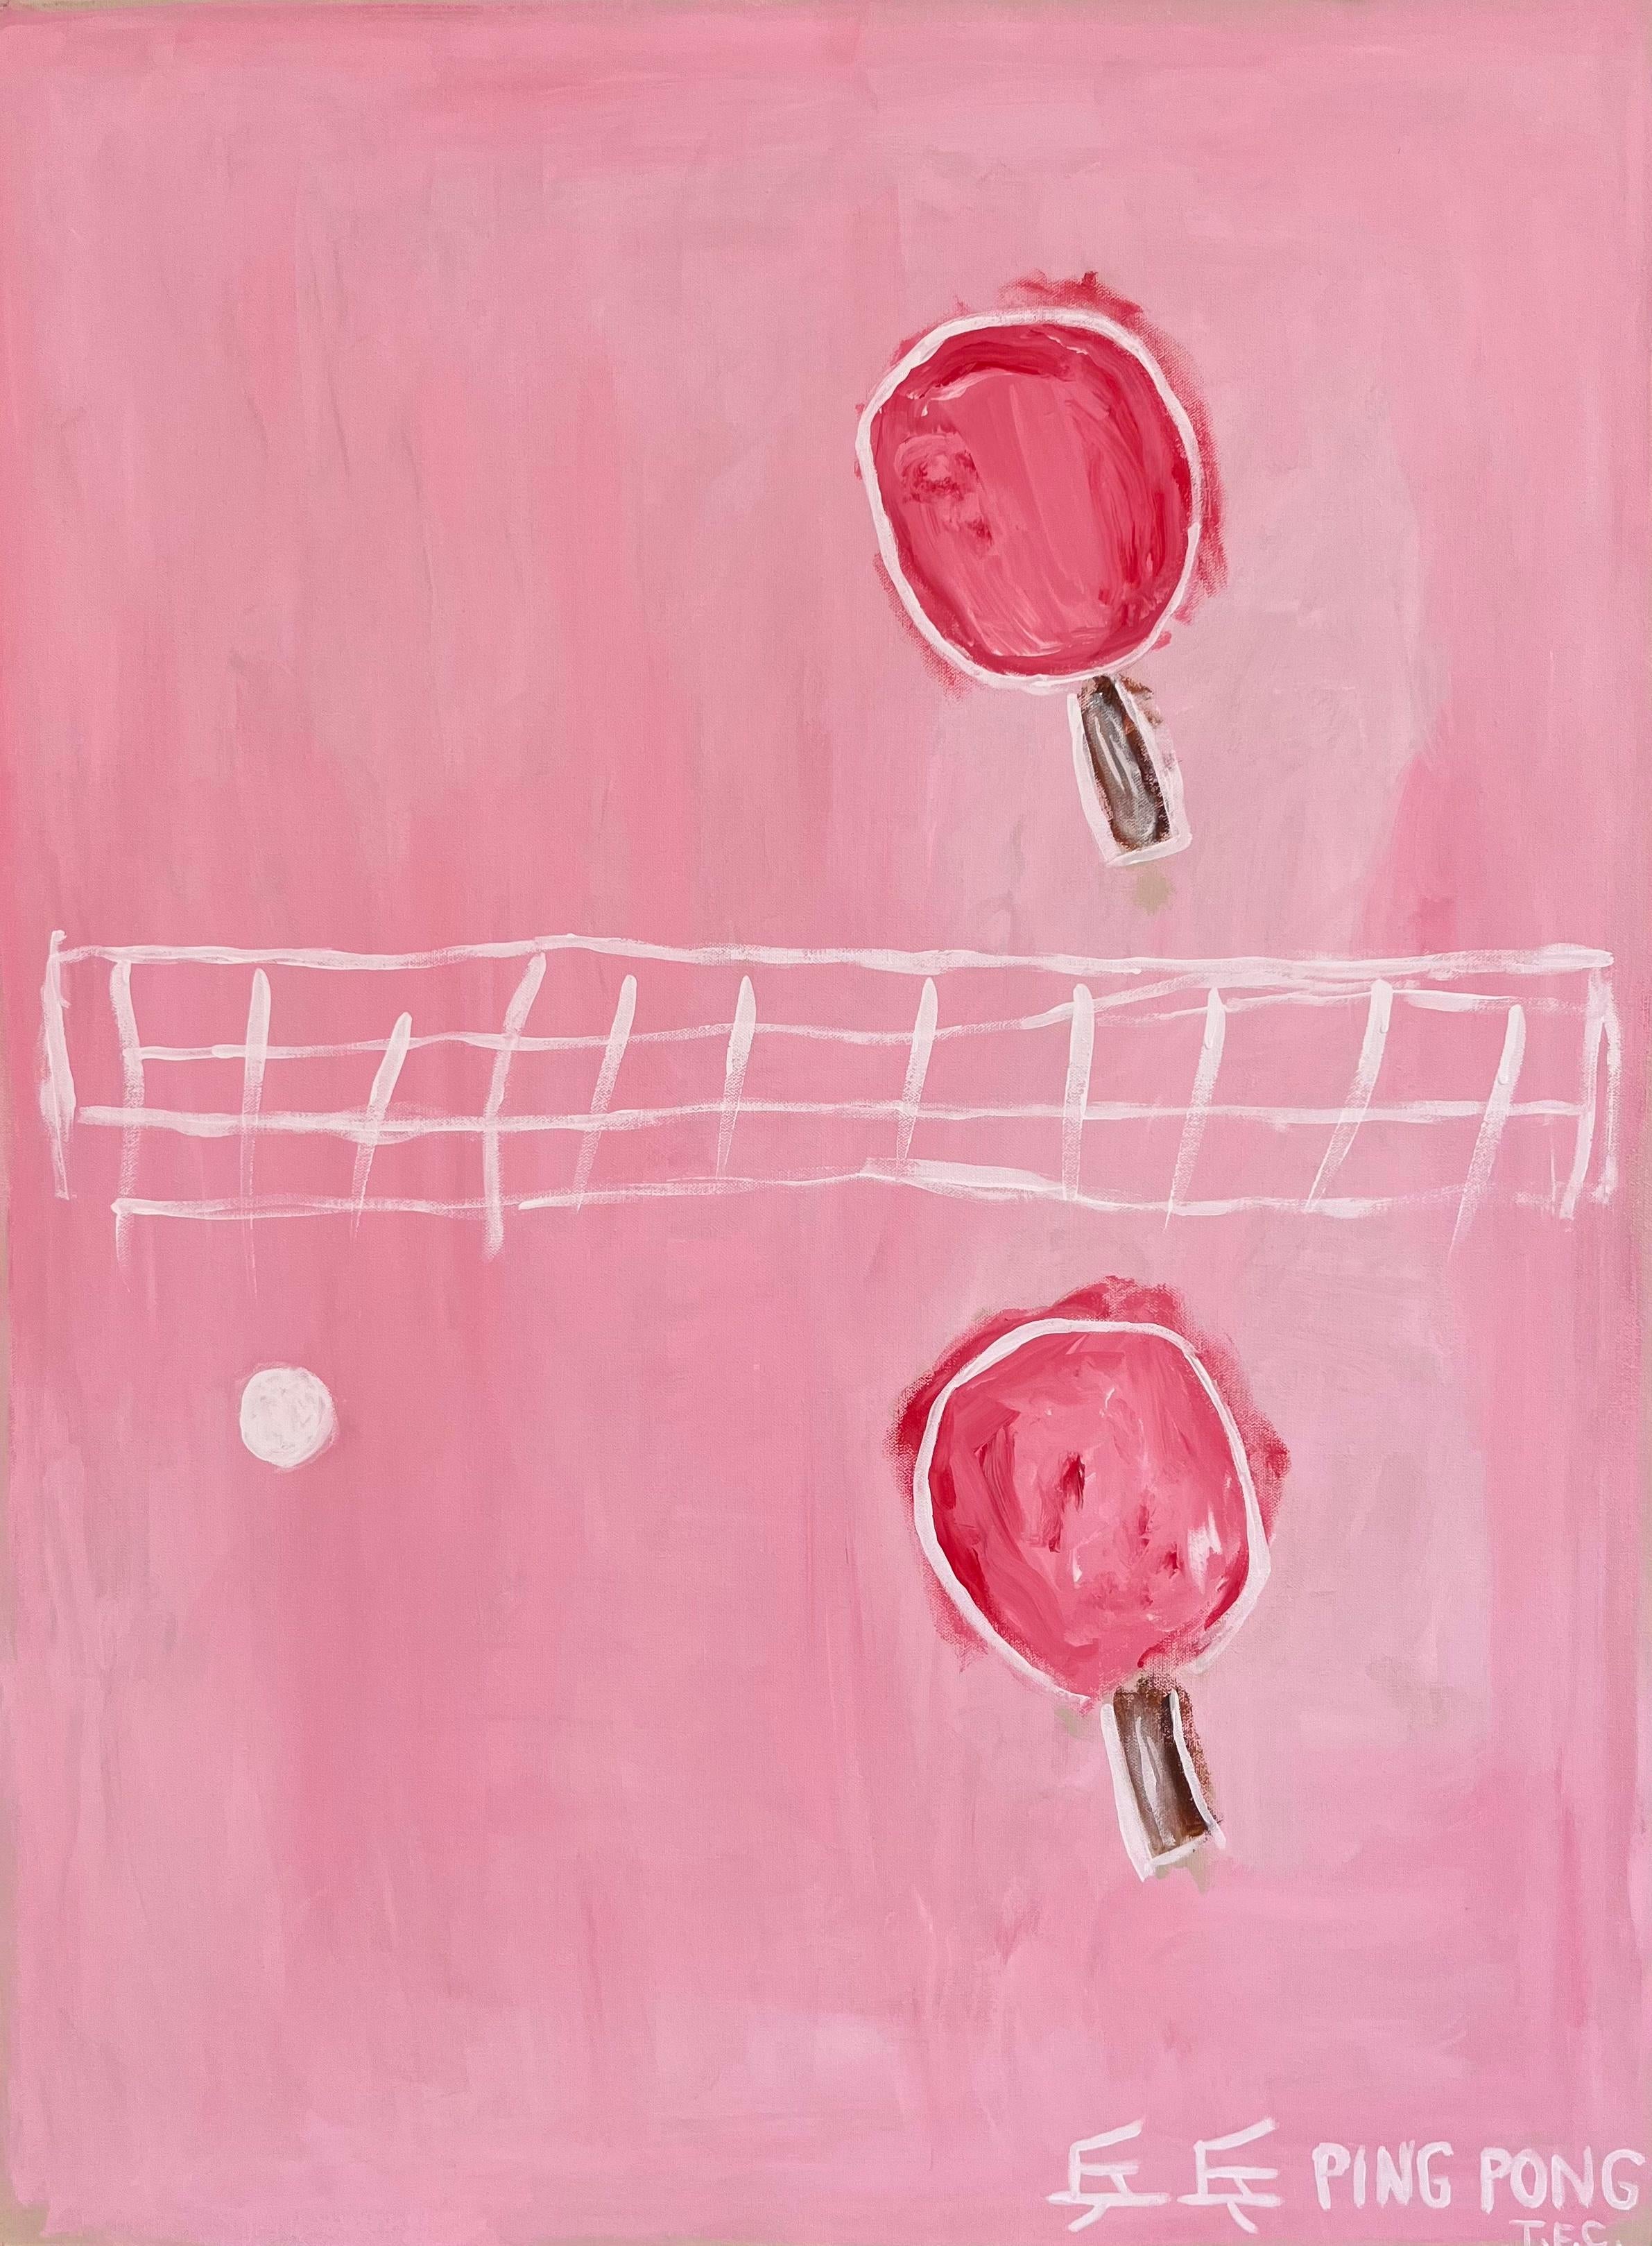 Tyler Casey Interior Painting - "Ping Pong (Pink)" Contemporary Abstract Pop Art Painting